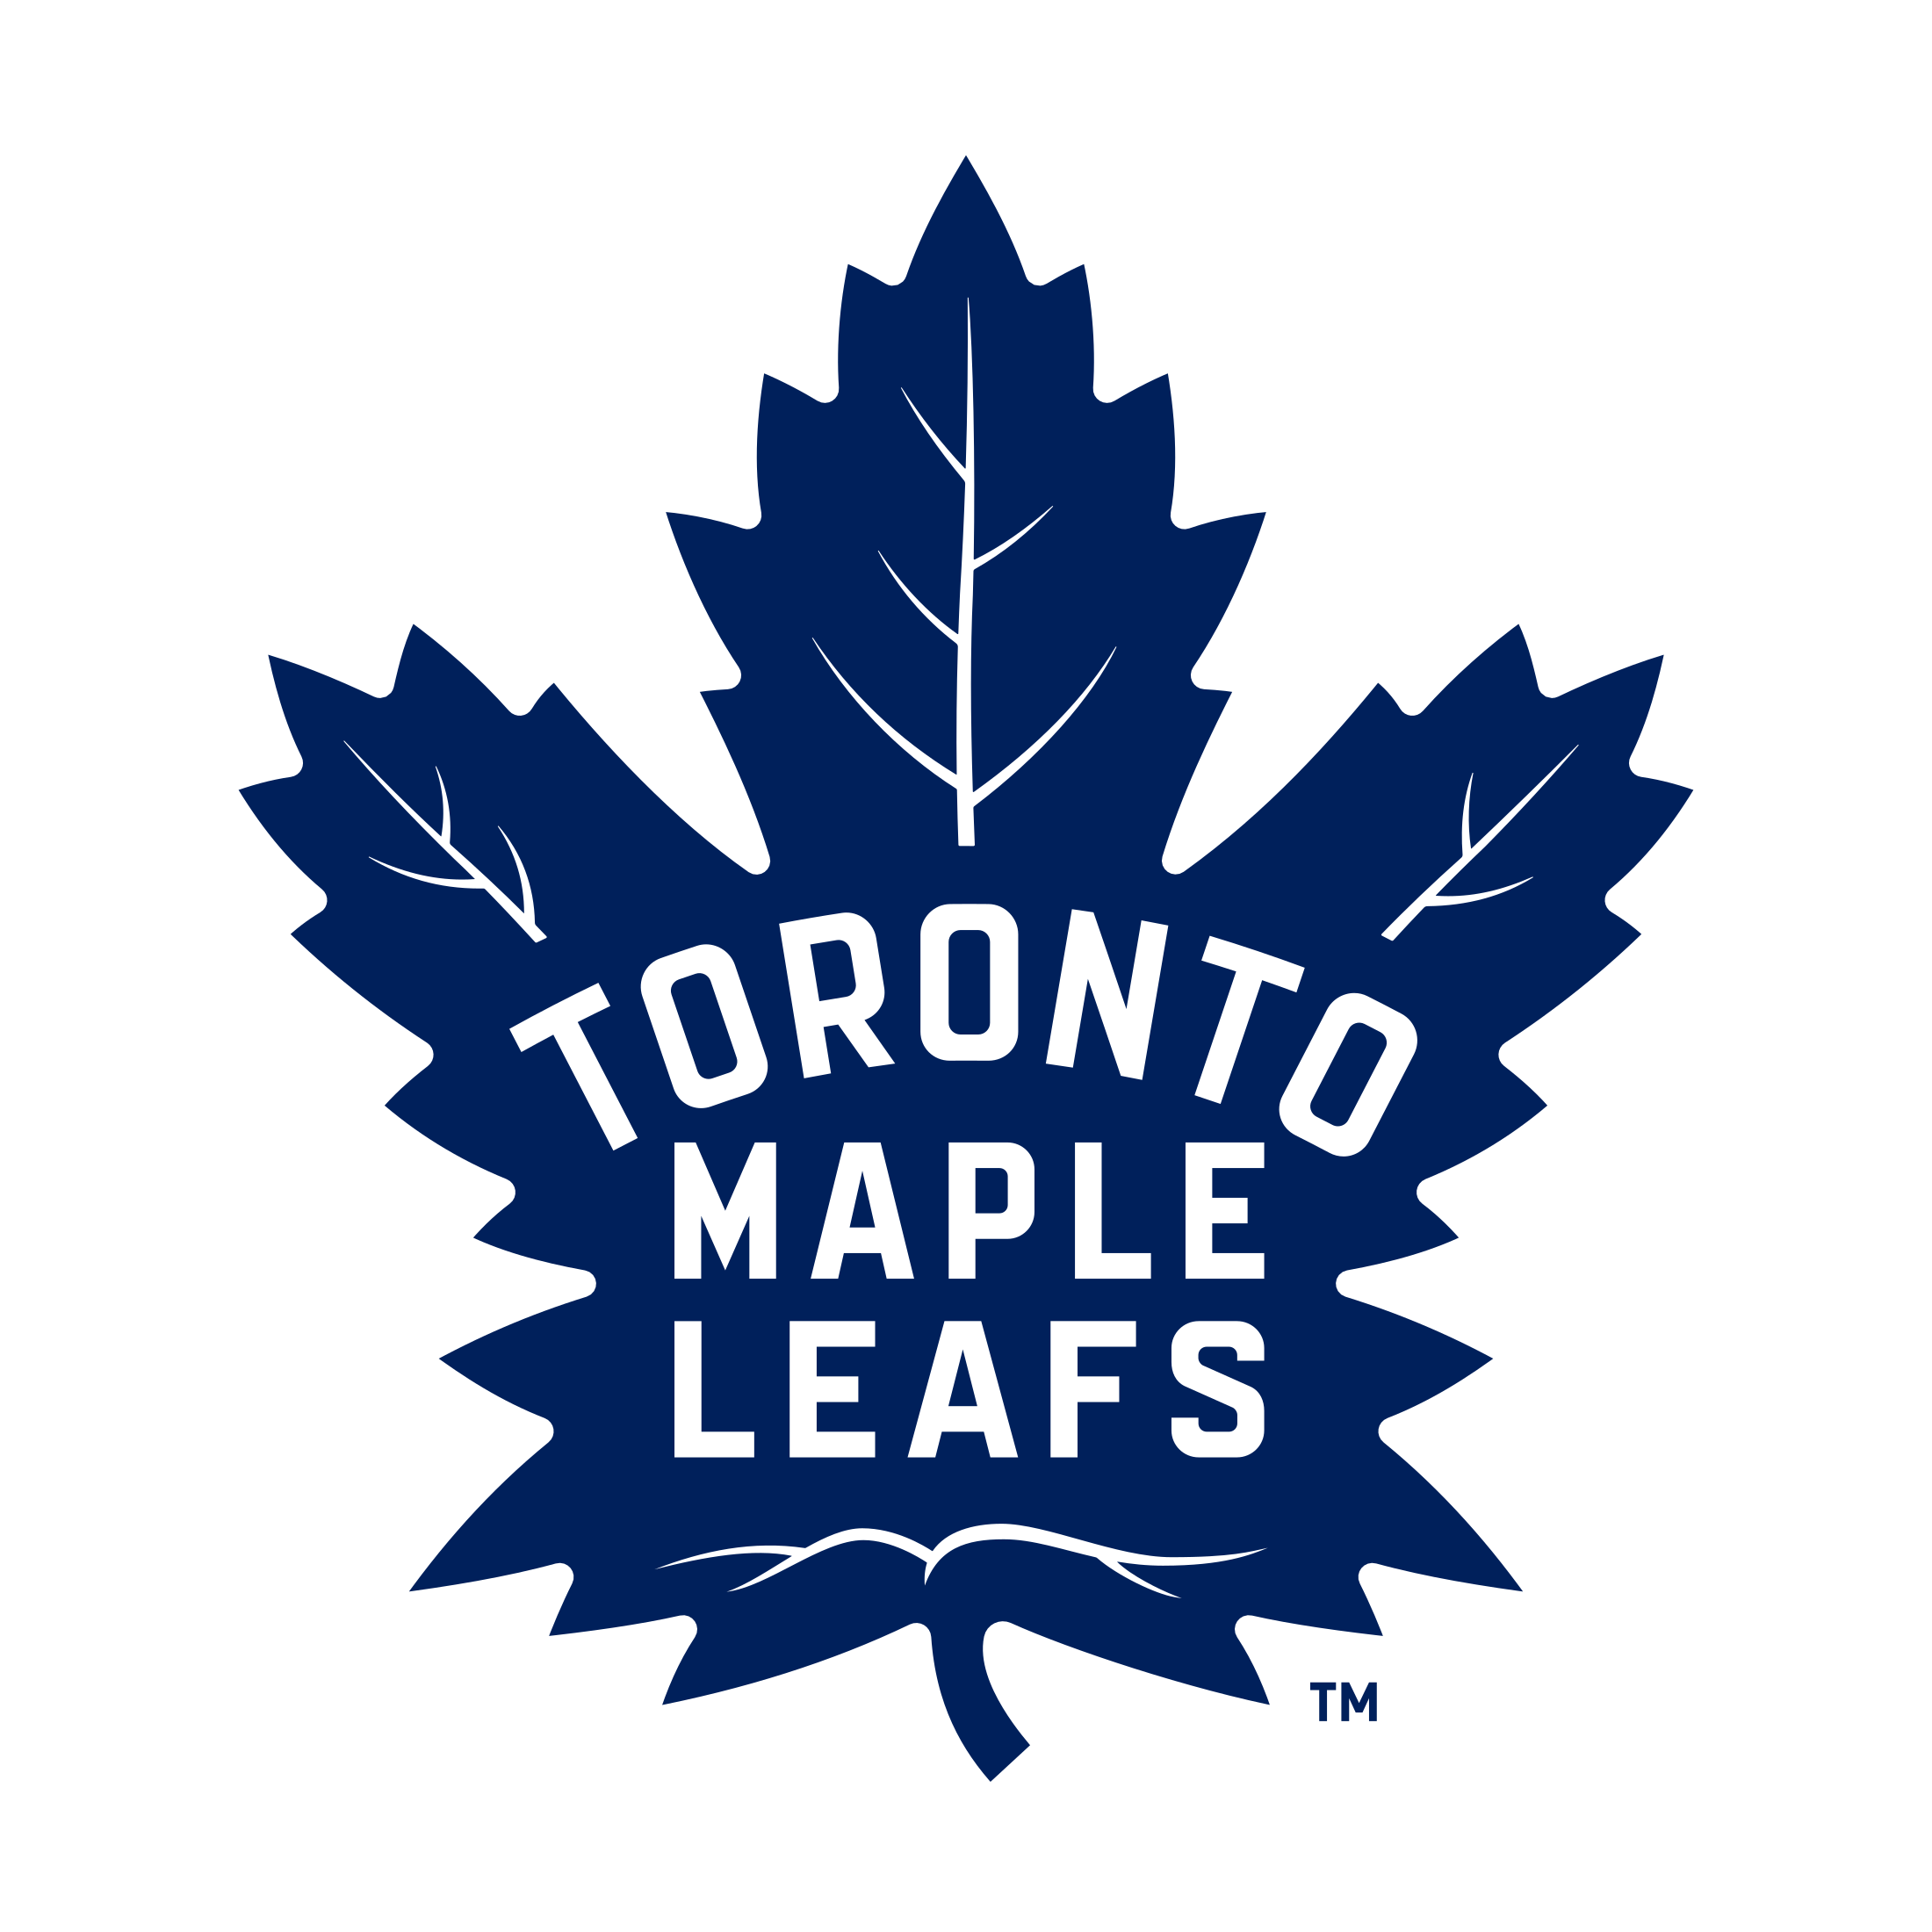 Toronto Maple Leafs Odds & Bets